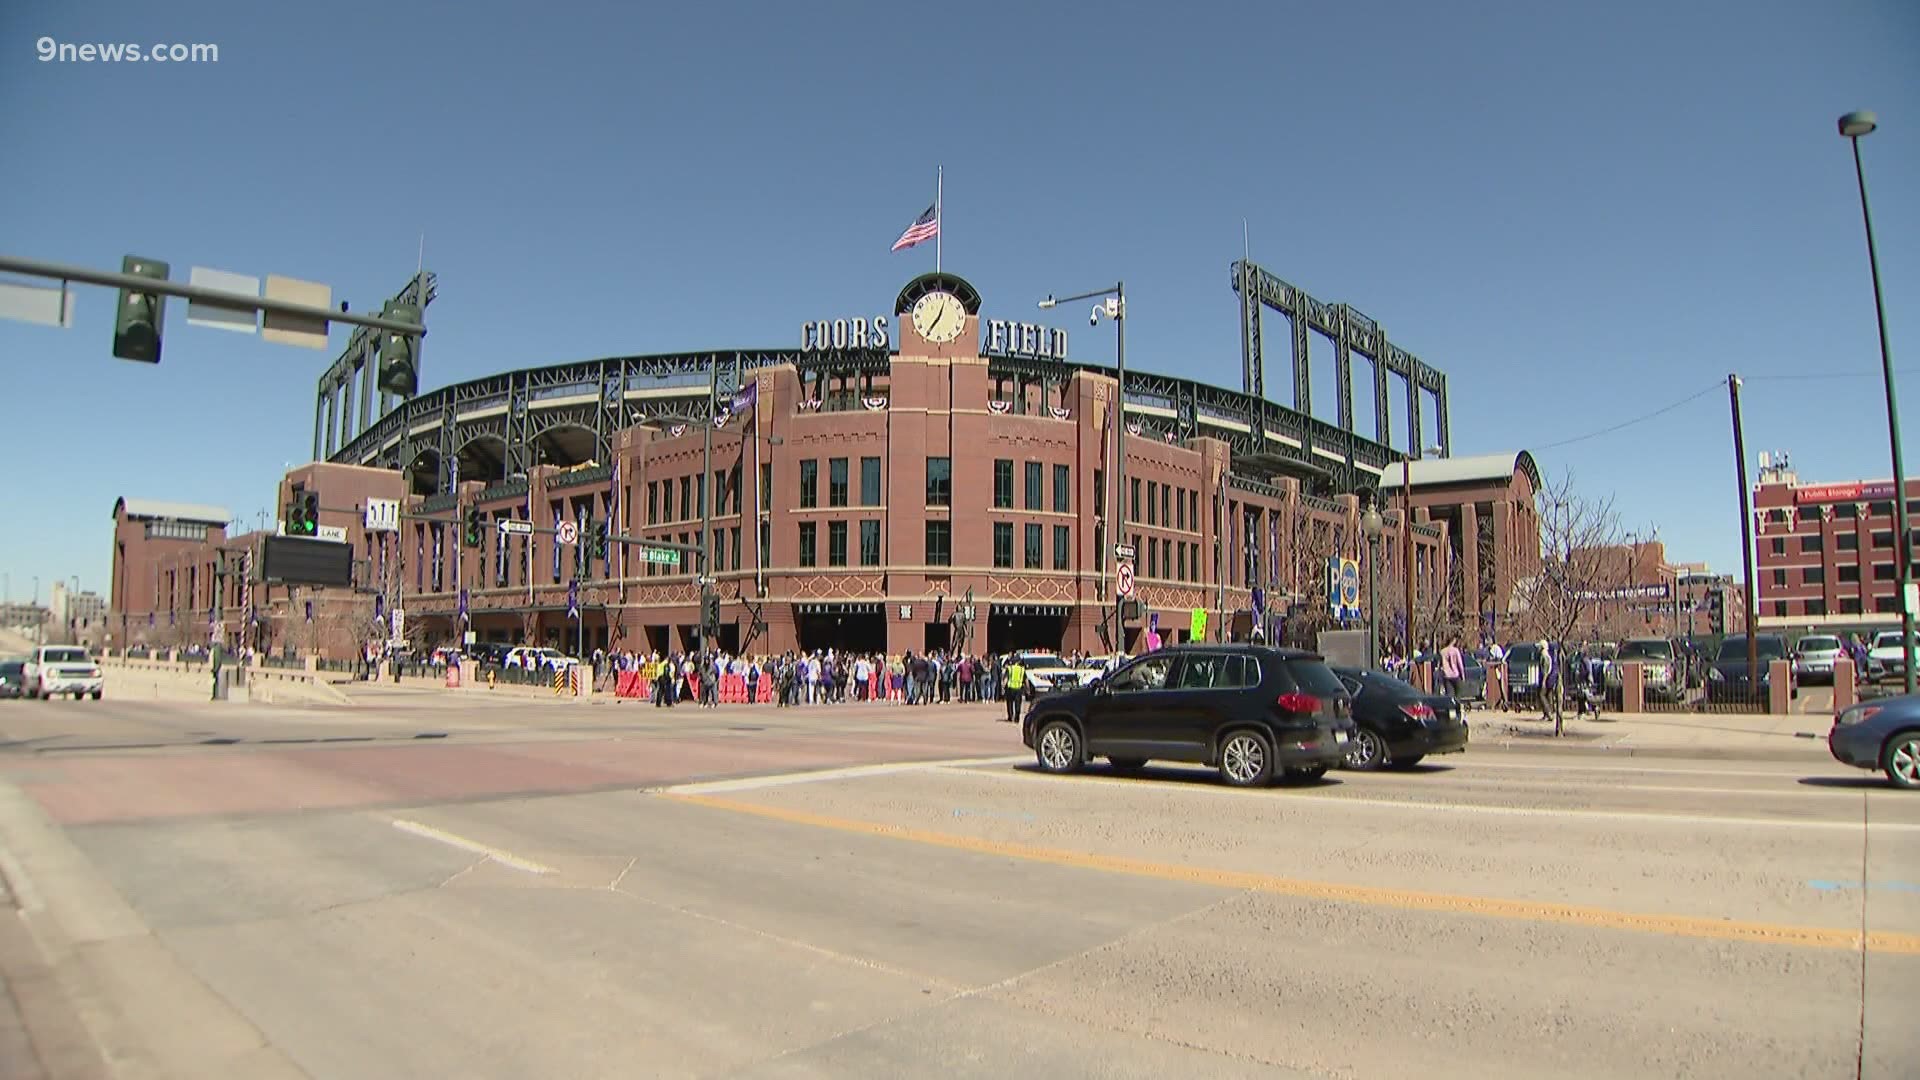 The Colorado Rockies are back and for the first time in more than a year fans are allowed back in the stands at Coors Field.